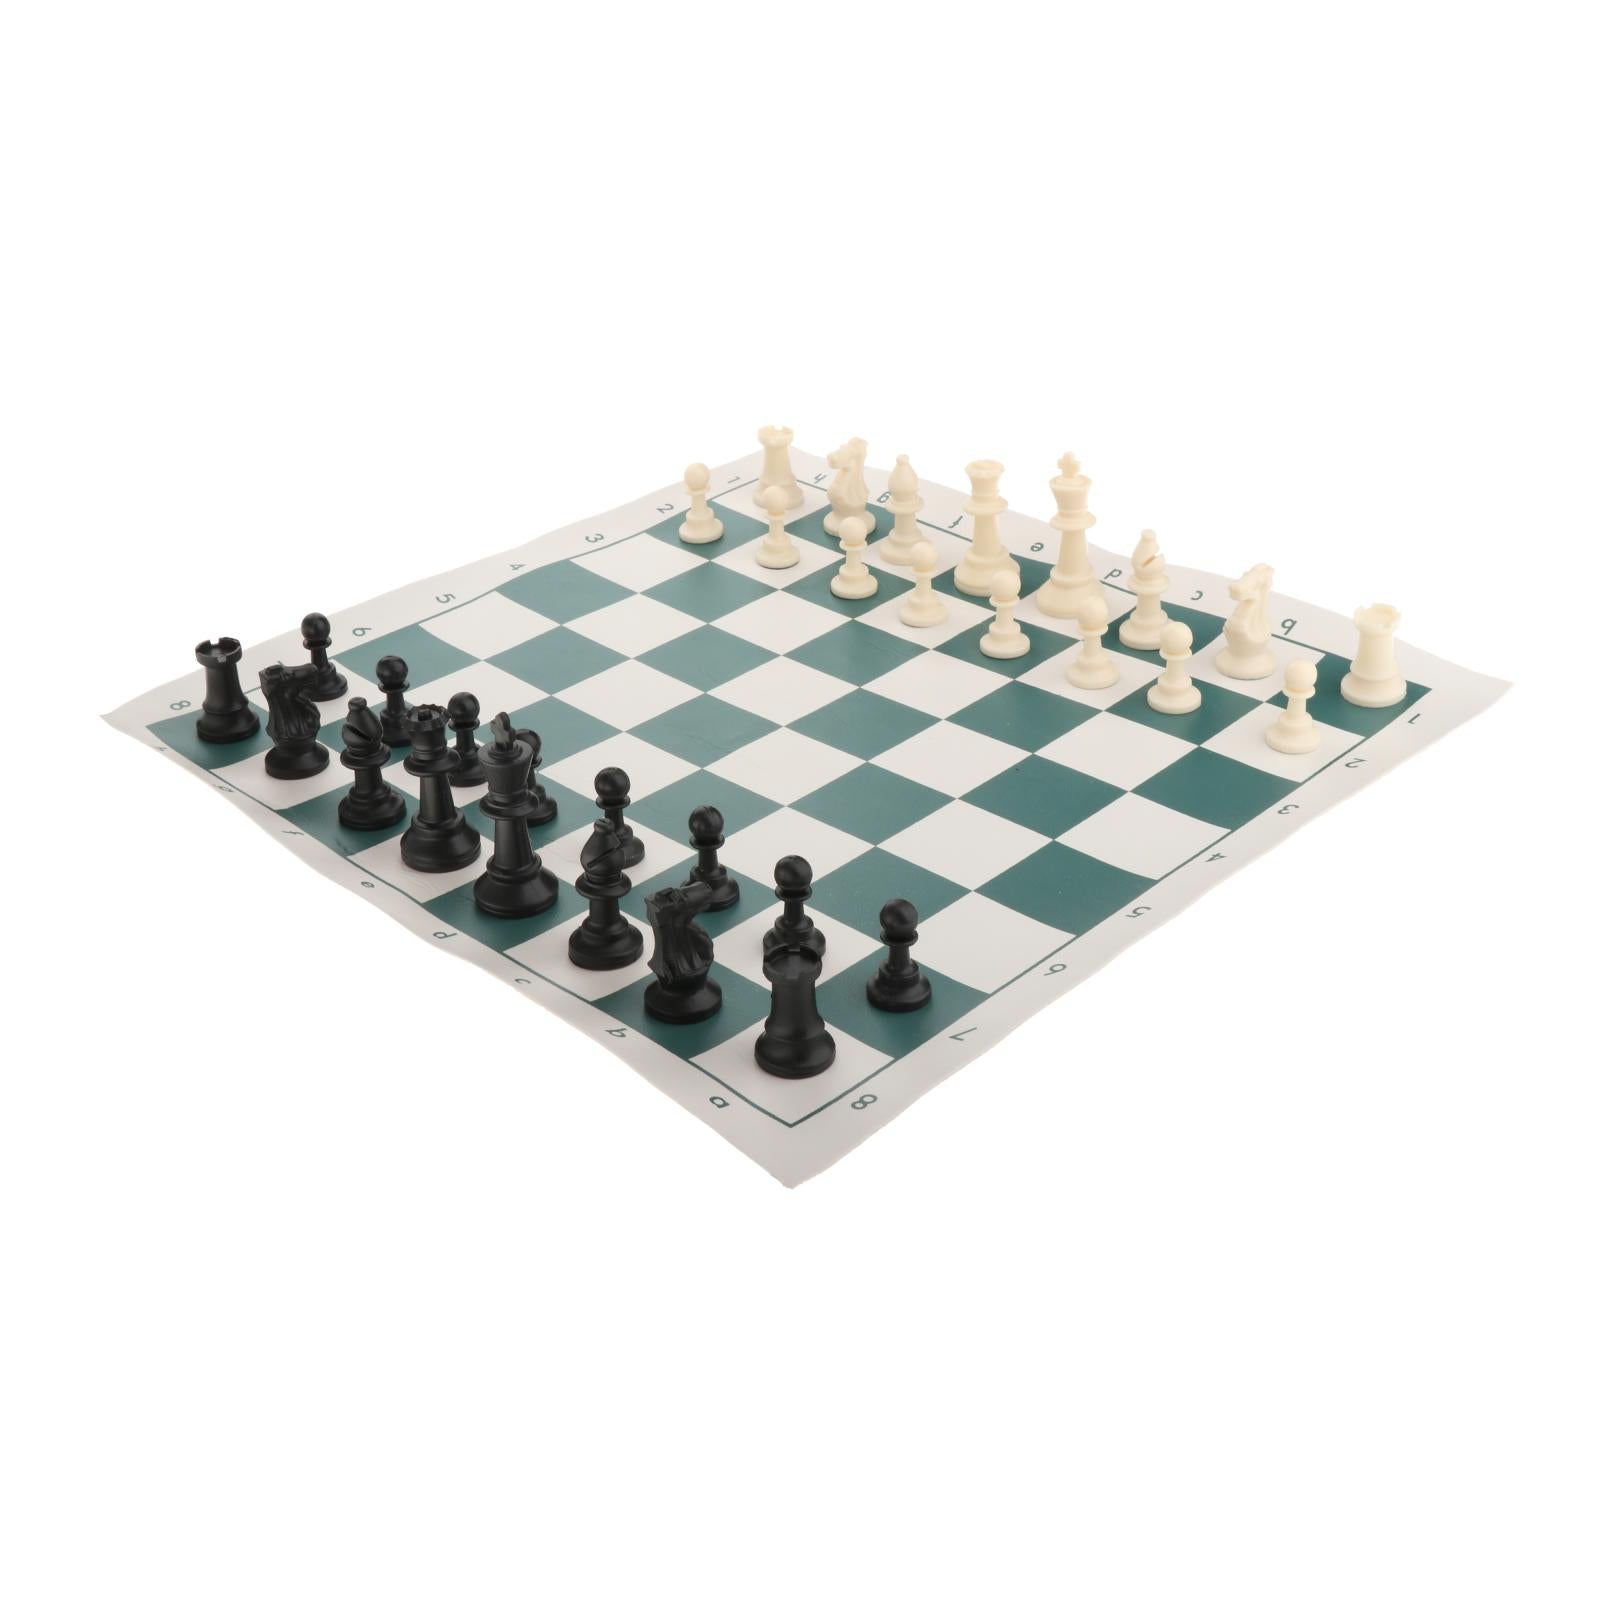 Folding Portable Chess Set 45x9cm Chees Pieces w/ Storage Bag for Kids Party